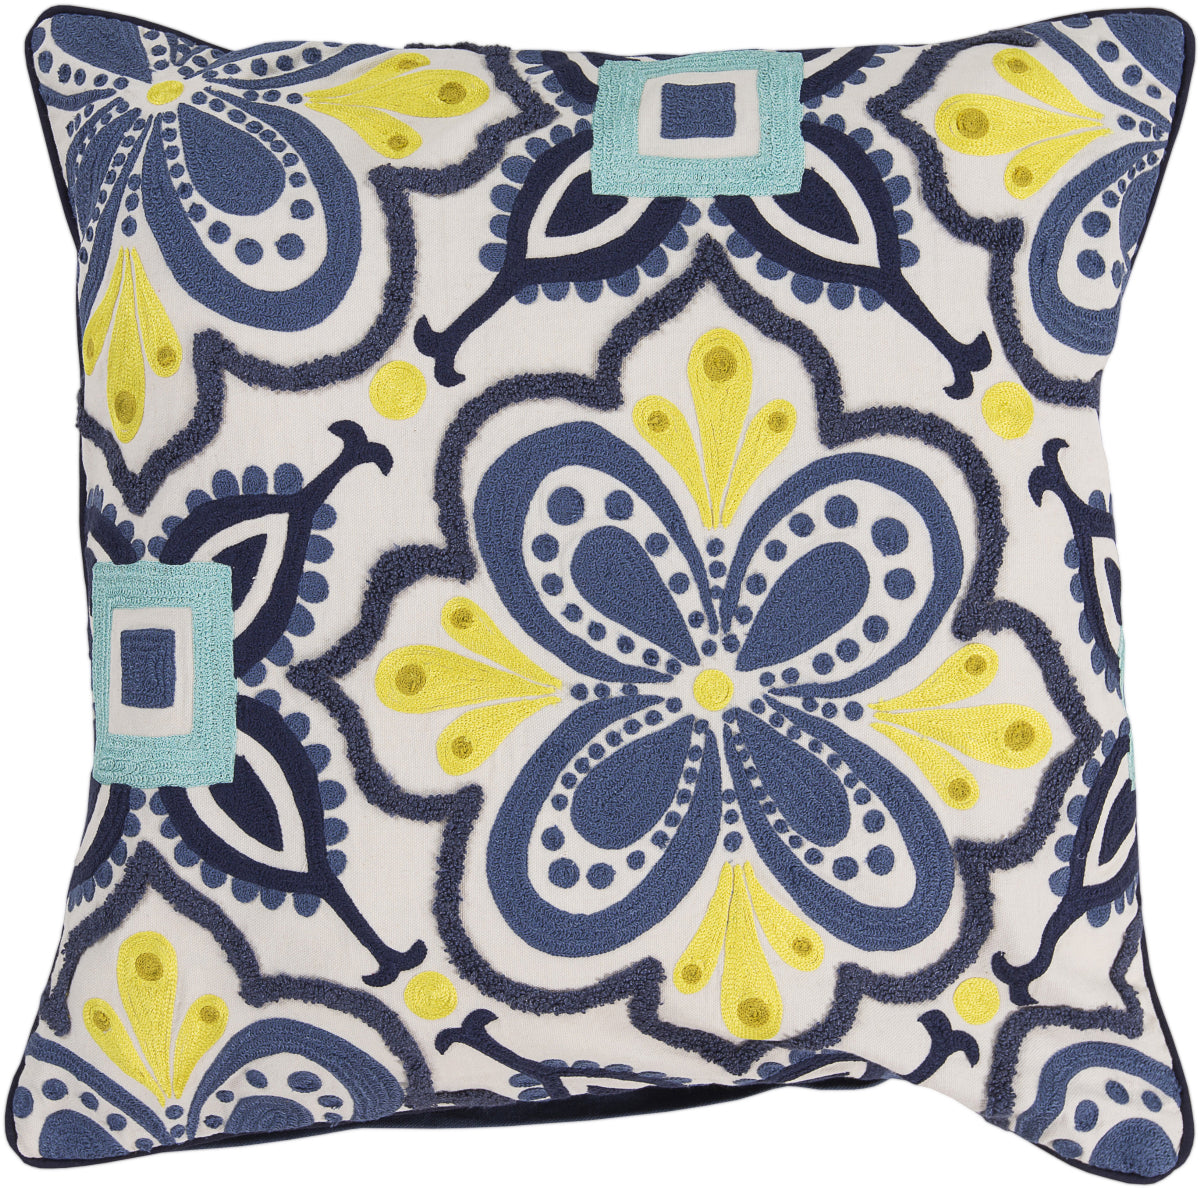 Surya Alhambra Embroidered Modern in Morocco KS-014 Pillow by Kate Spain main image